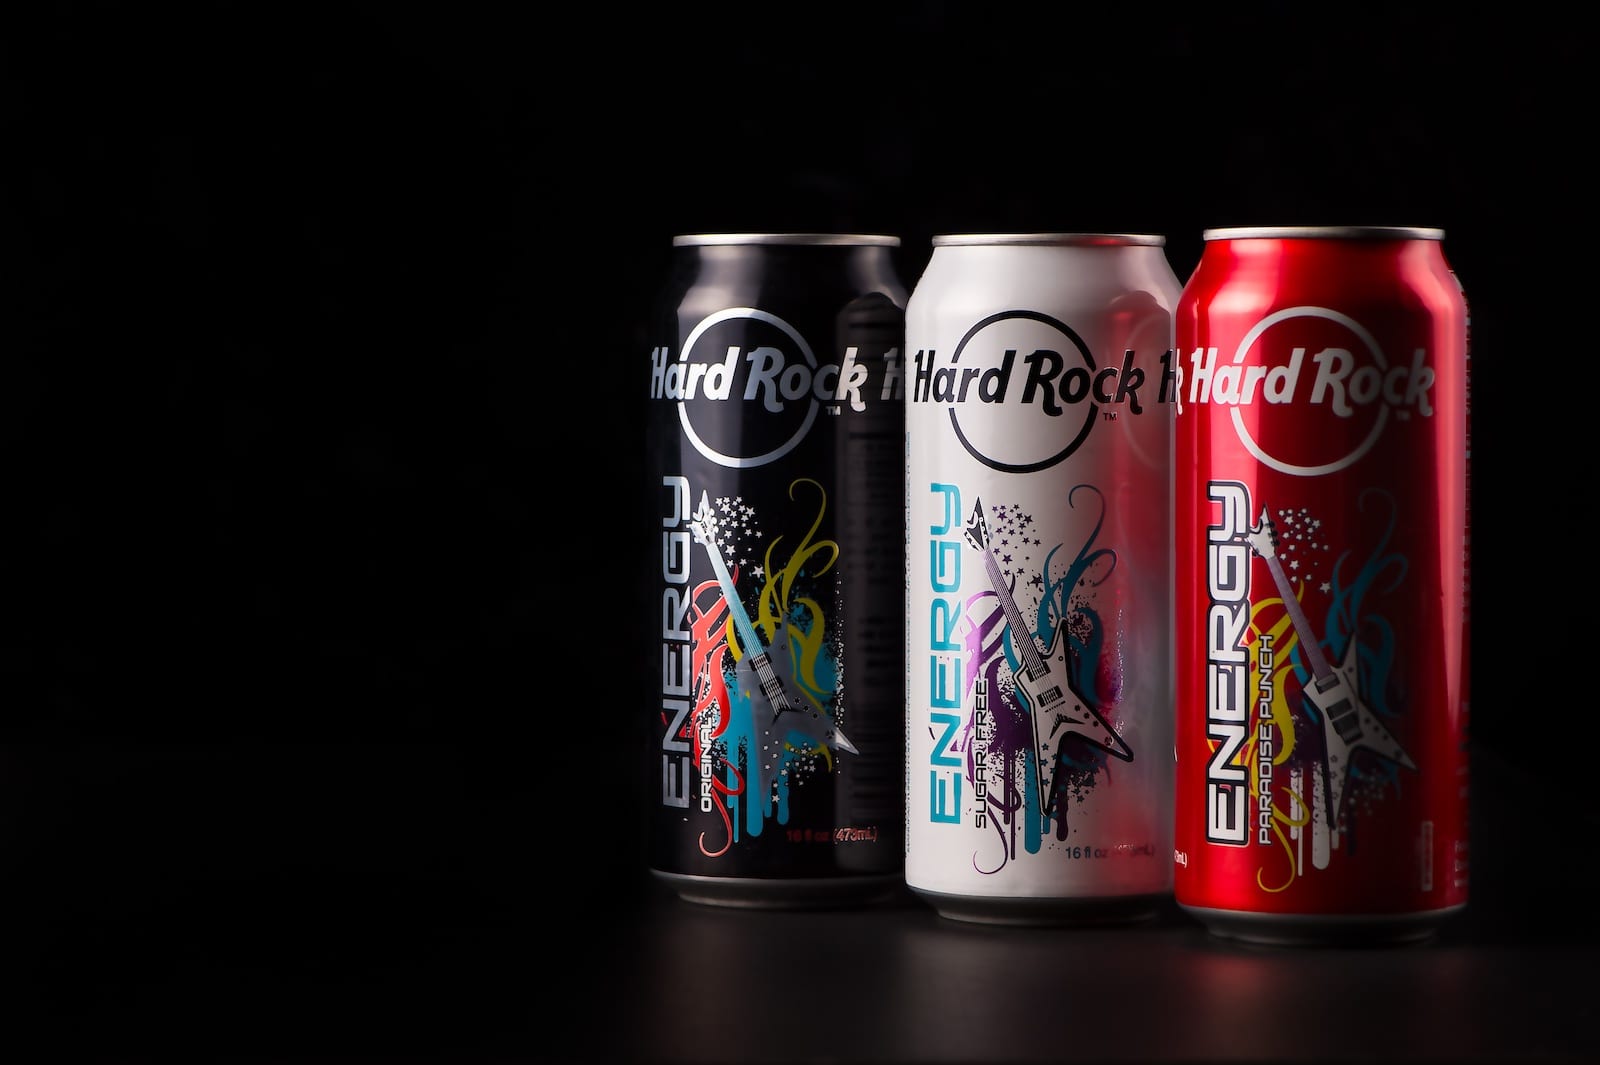 Three cans of Hard Rock Energy drinks on display